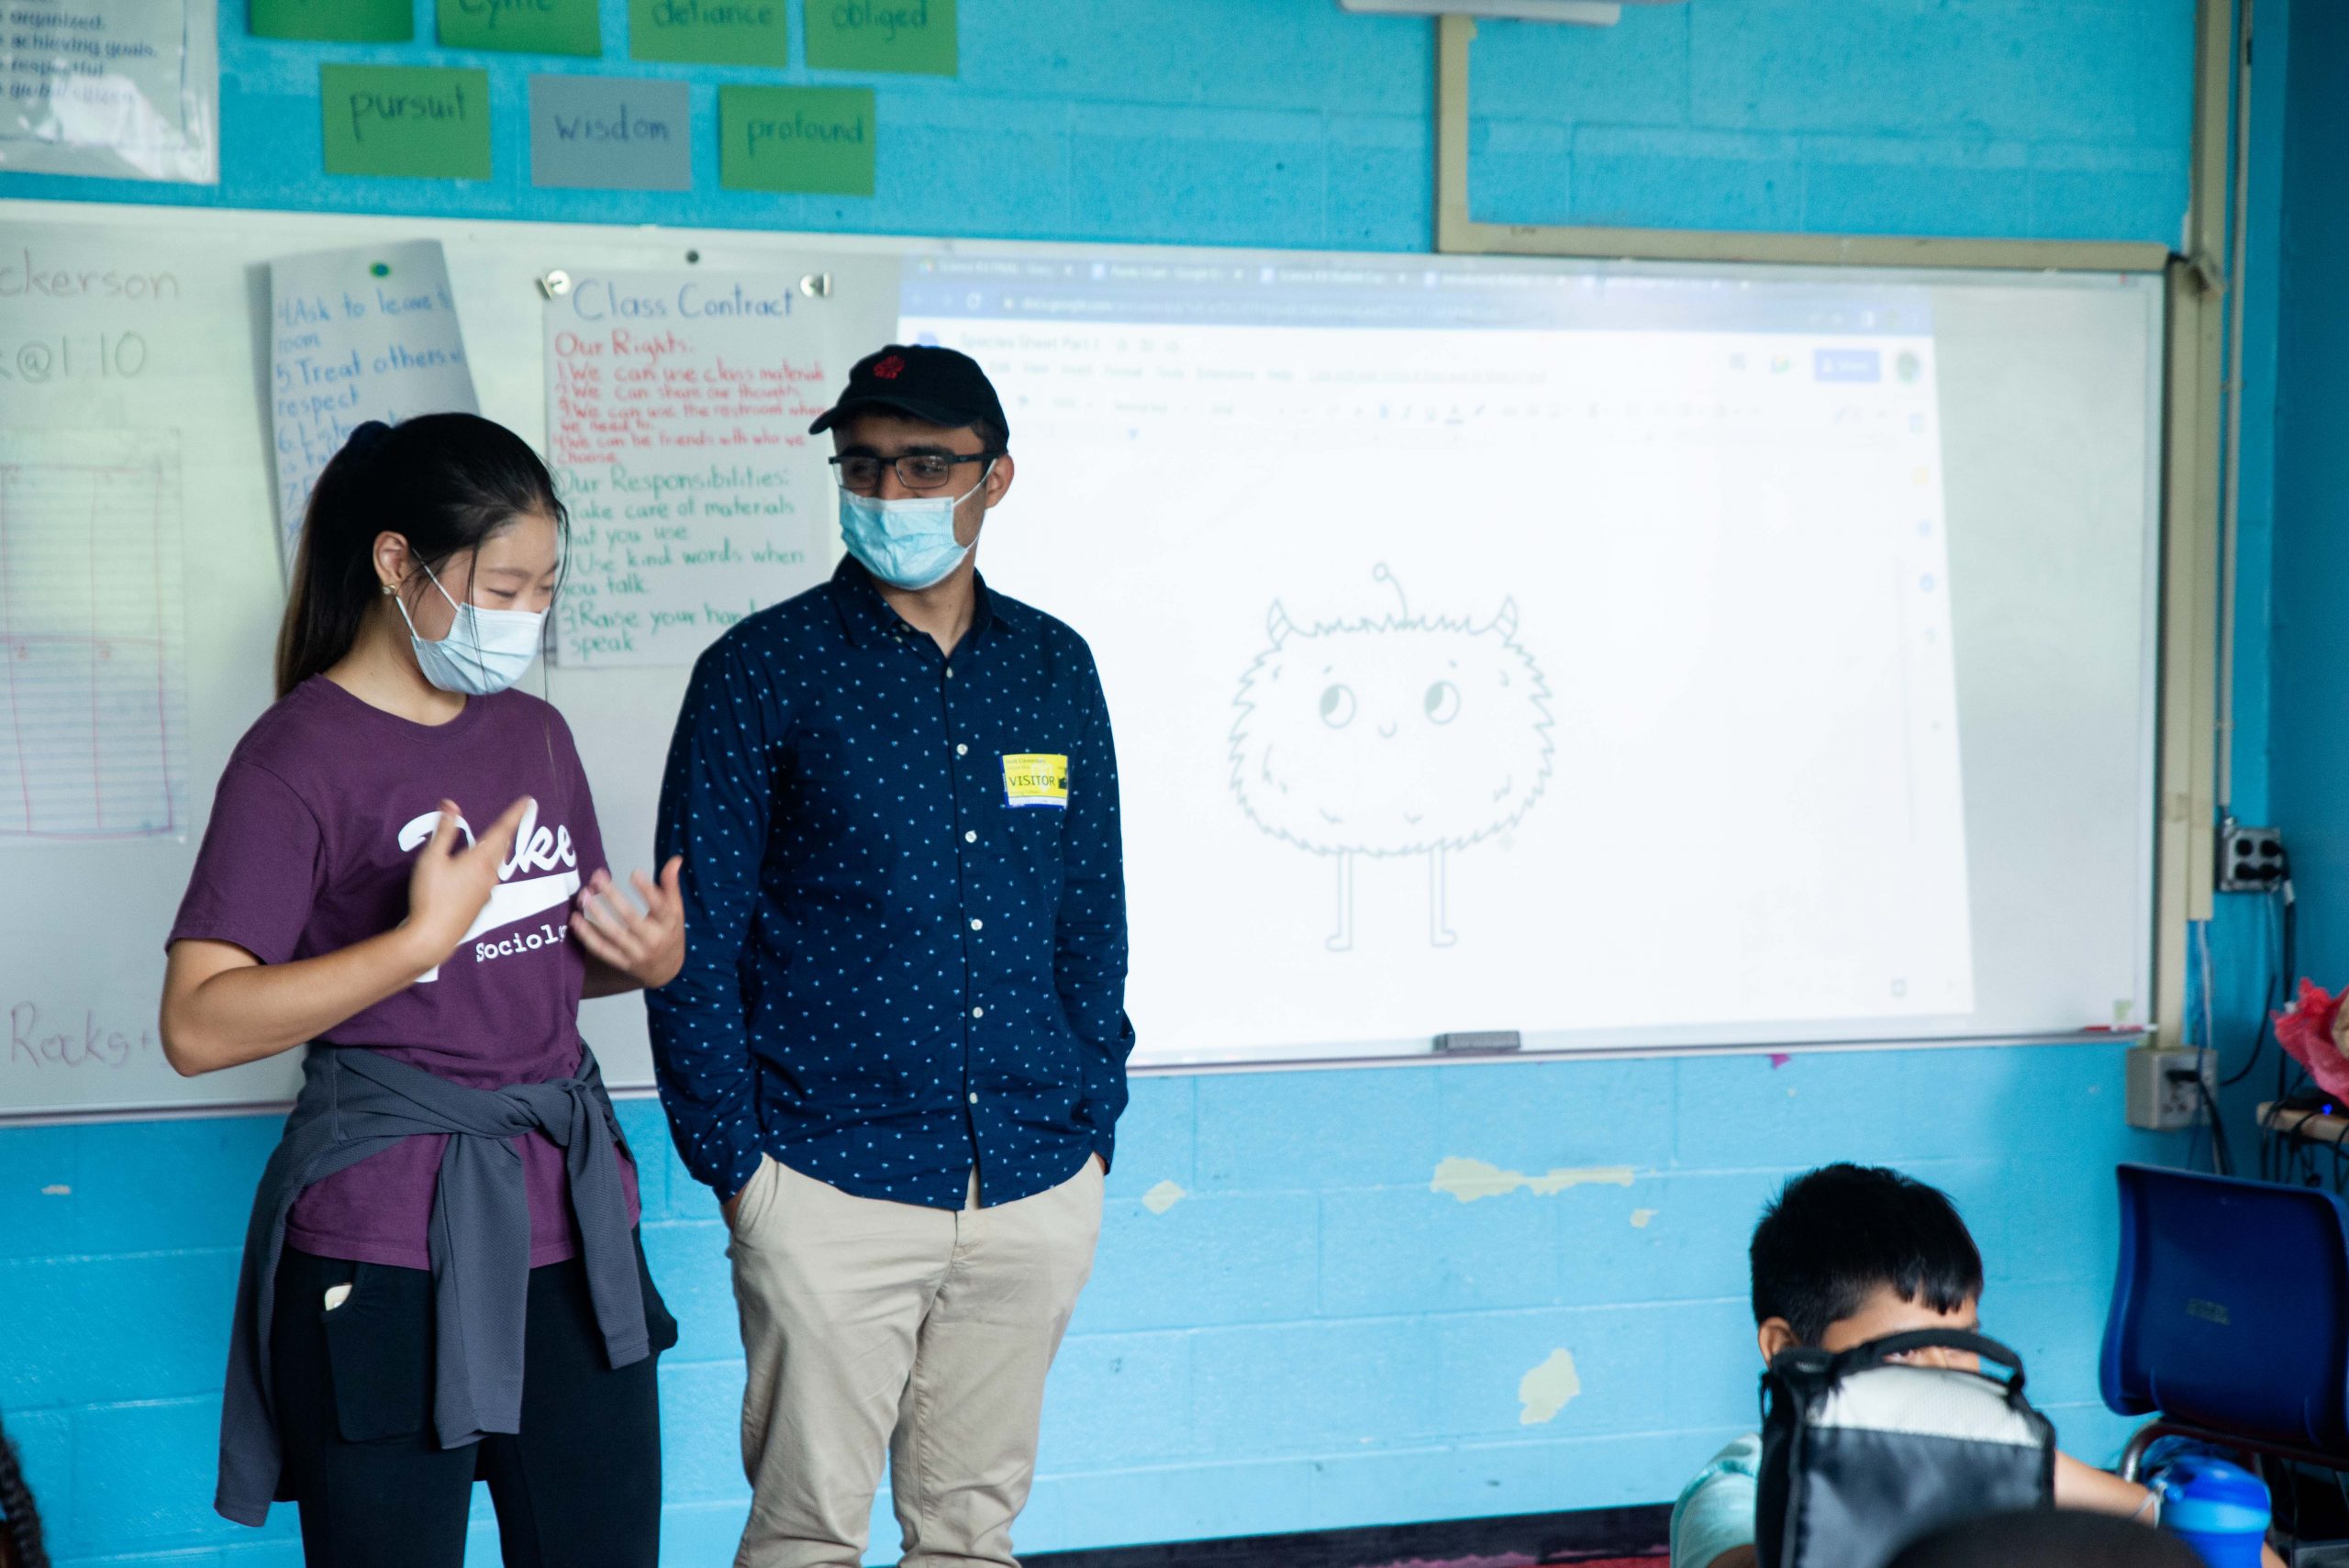 The Huang Fellows present their science kits at Holt Elementary School